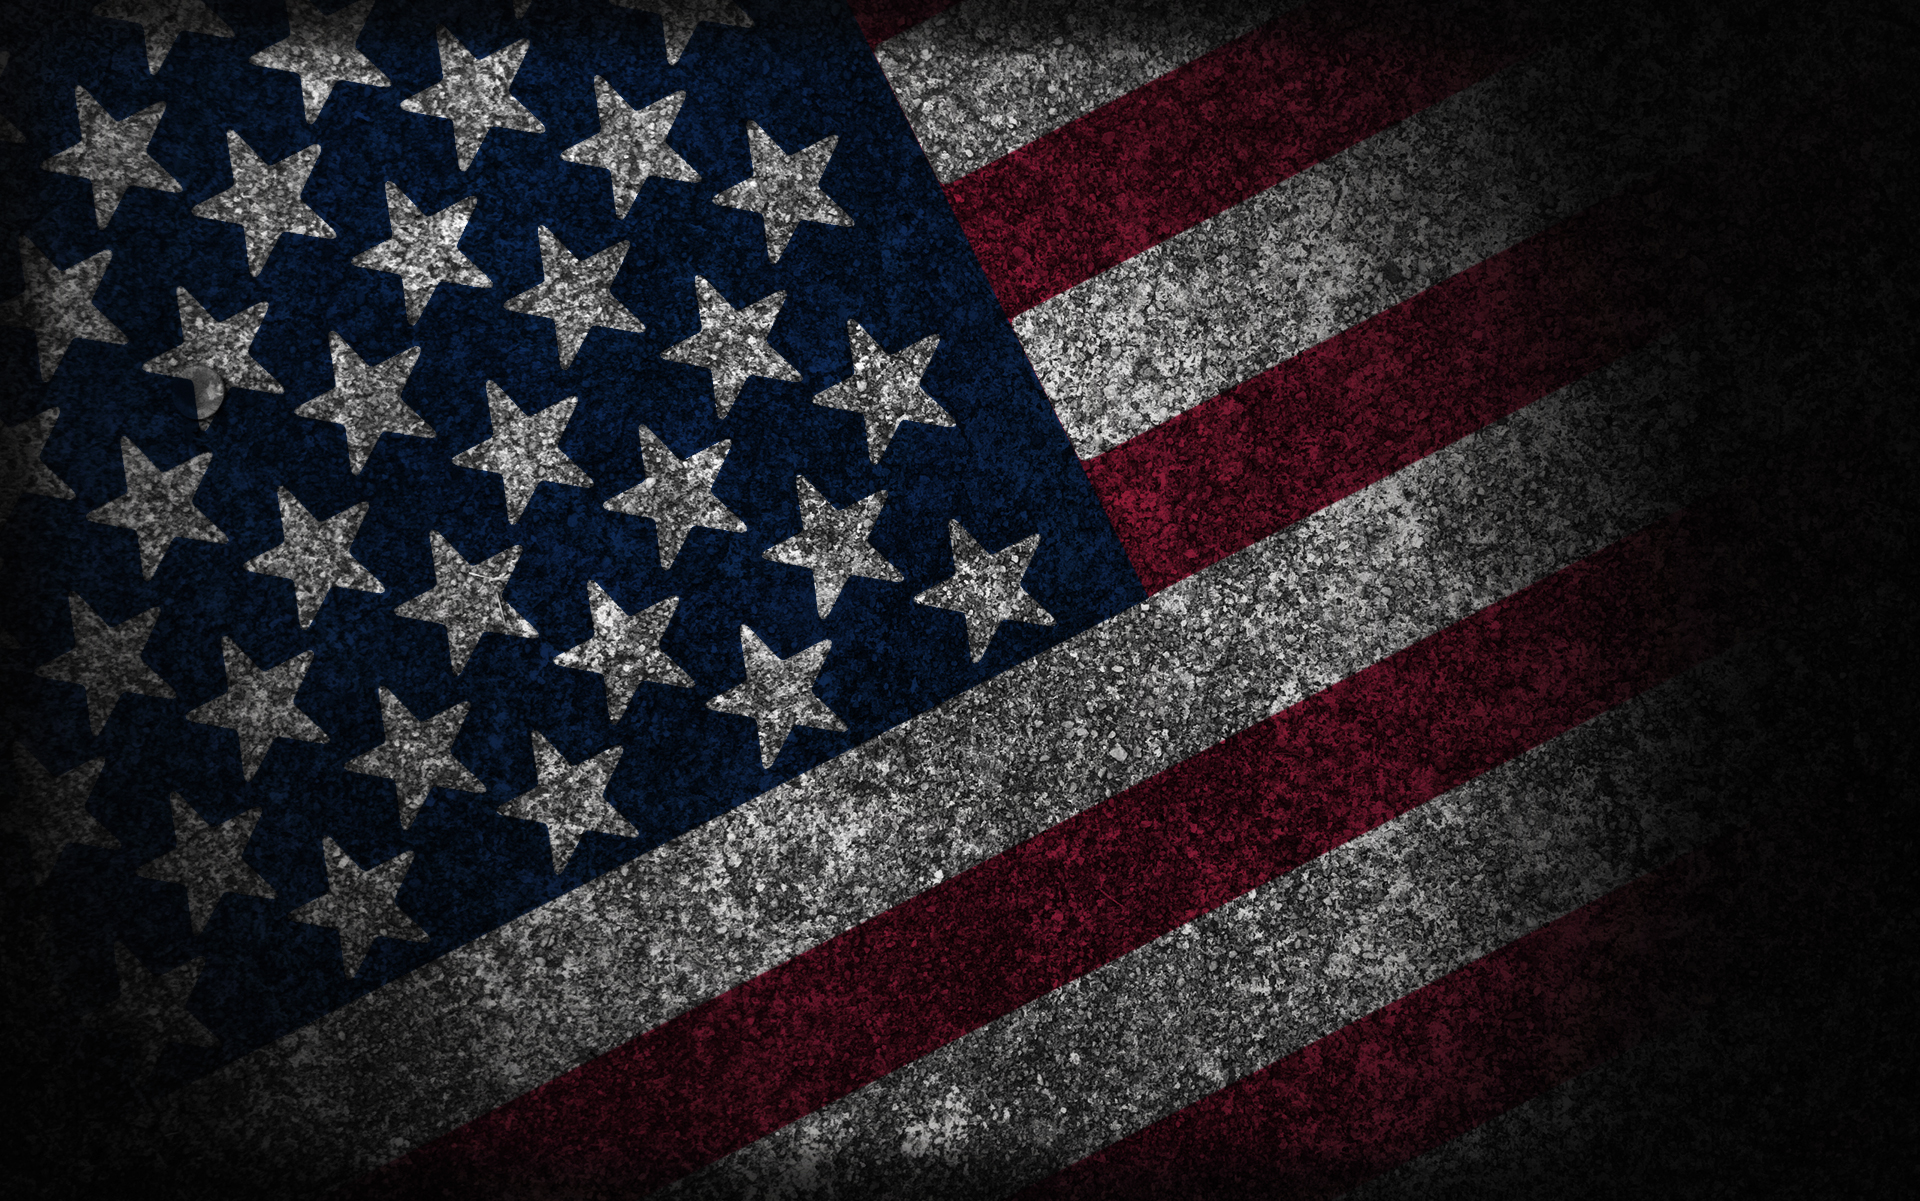 American Flag Wallpaper 1920x1200 by hassified on